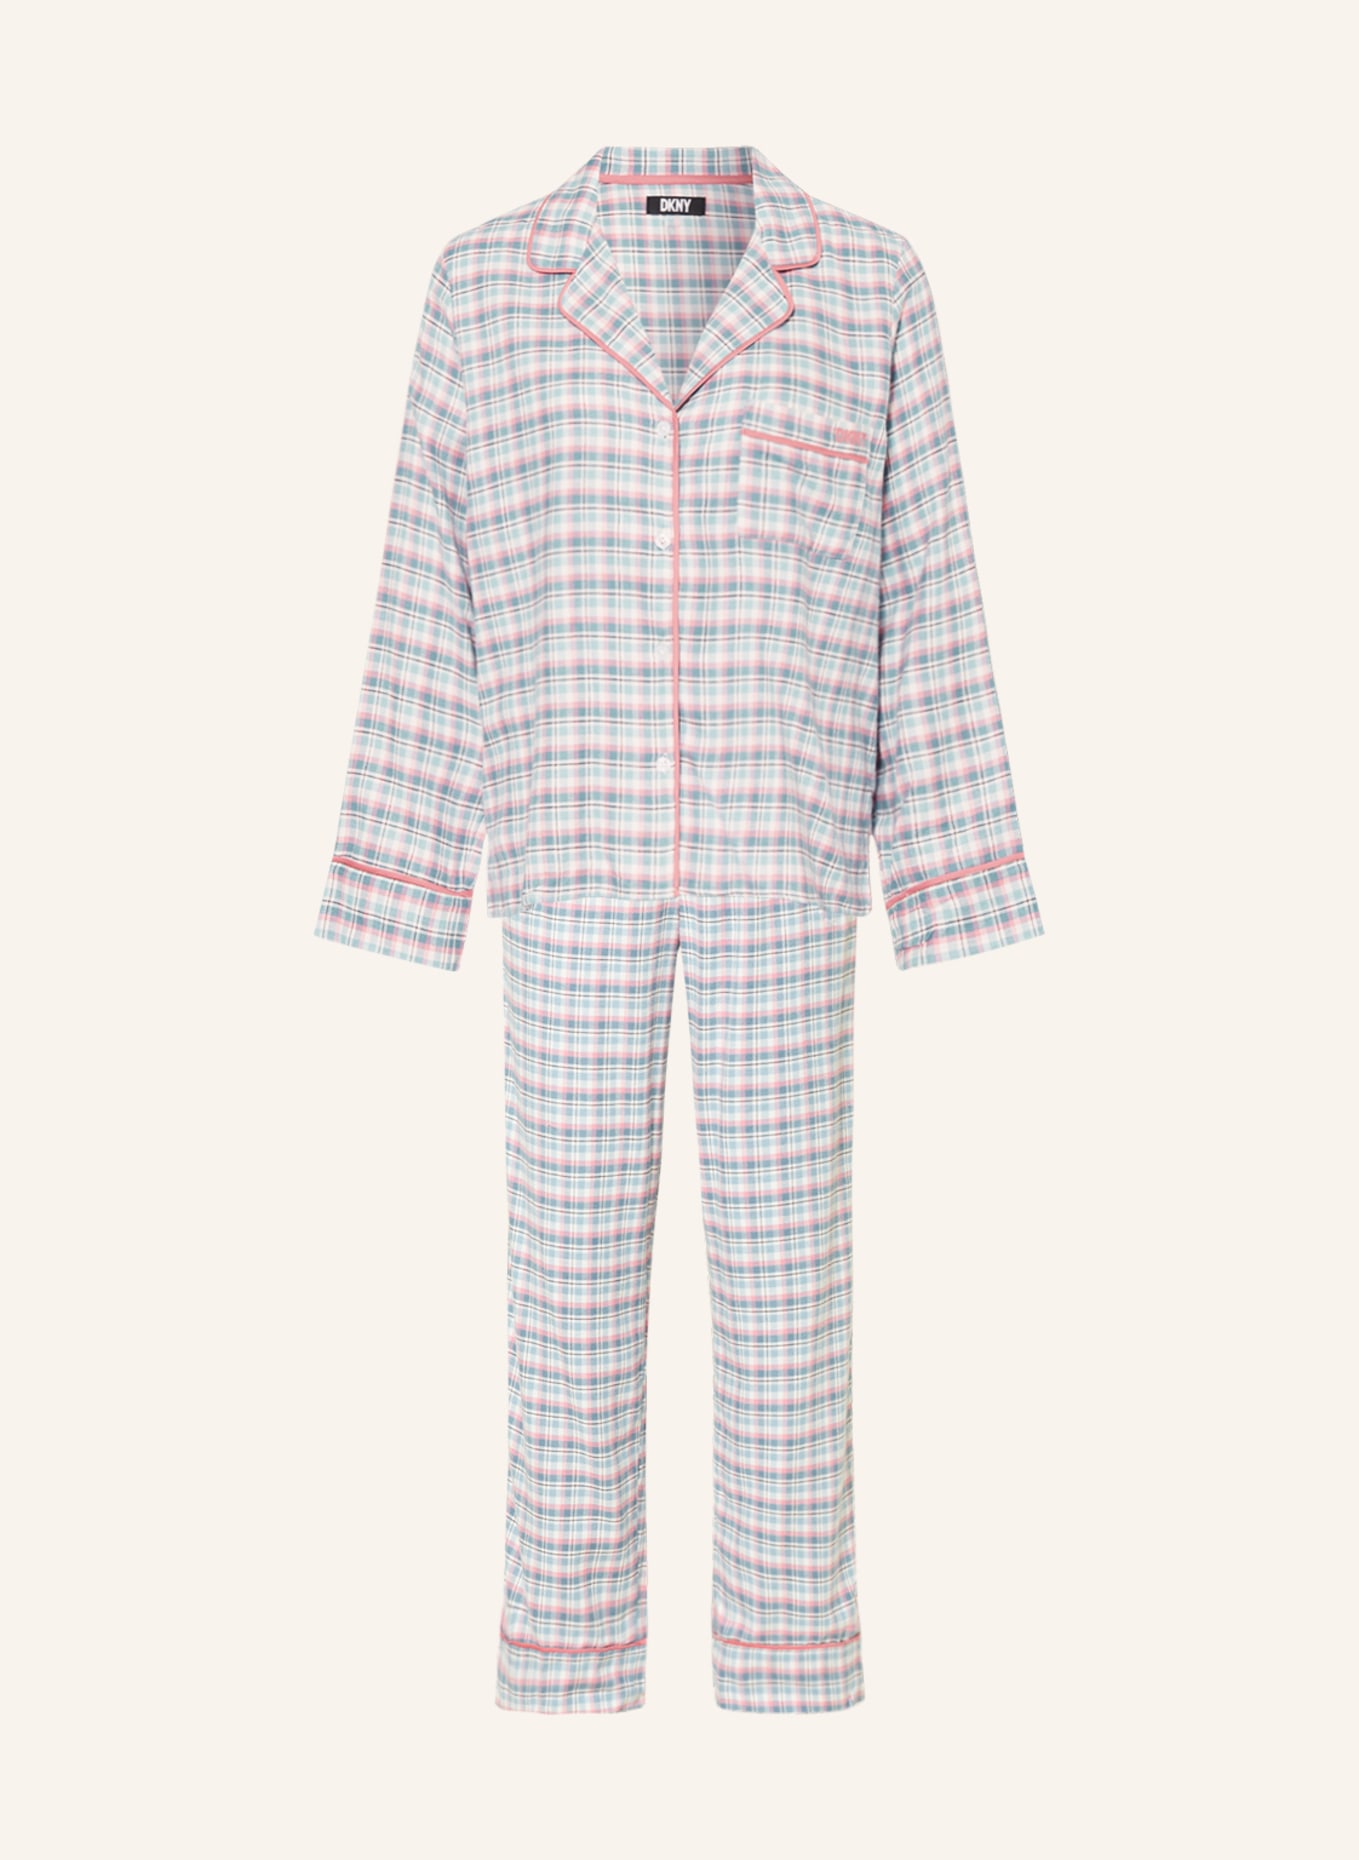 DKNY Flannel pajamas, Color: BLUE/ PINK/ WHITE (Image 1)